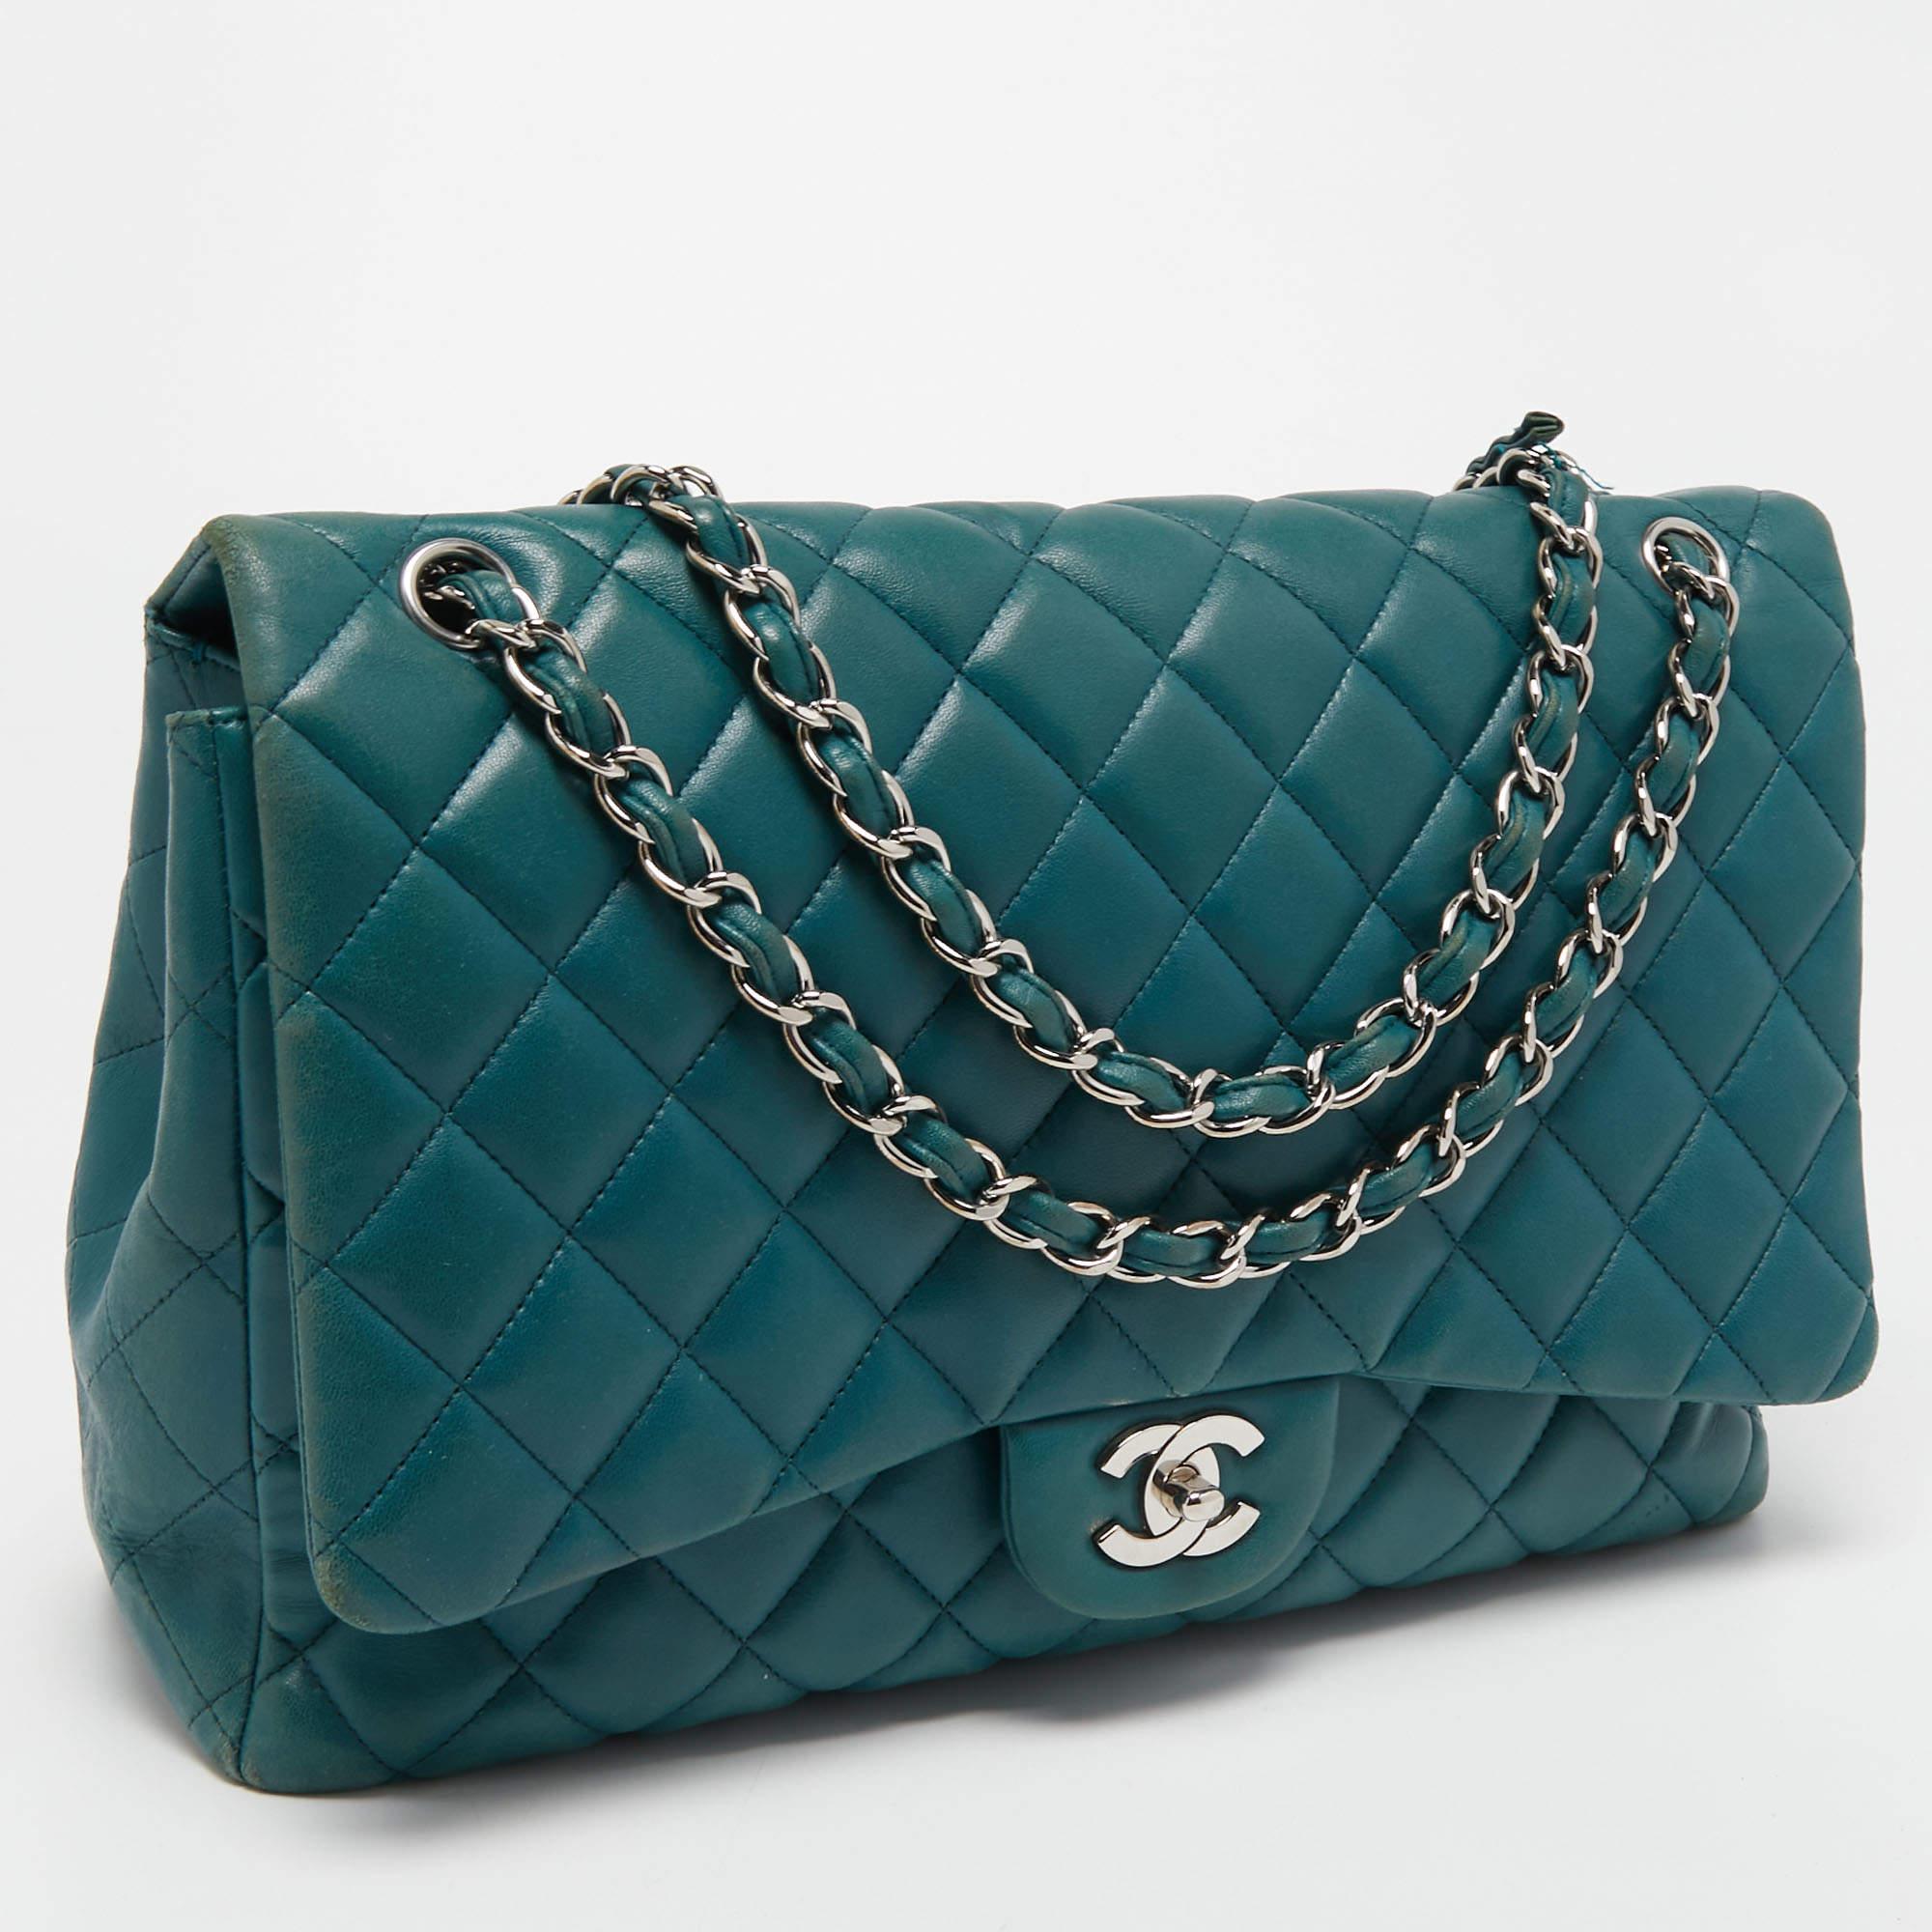 Chanel Teal Blue Quilted Leather Maxi Classic Single Flap Shoulder Bag In Fair Condition In Dubai, Al Qouz 2